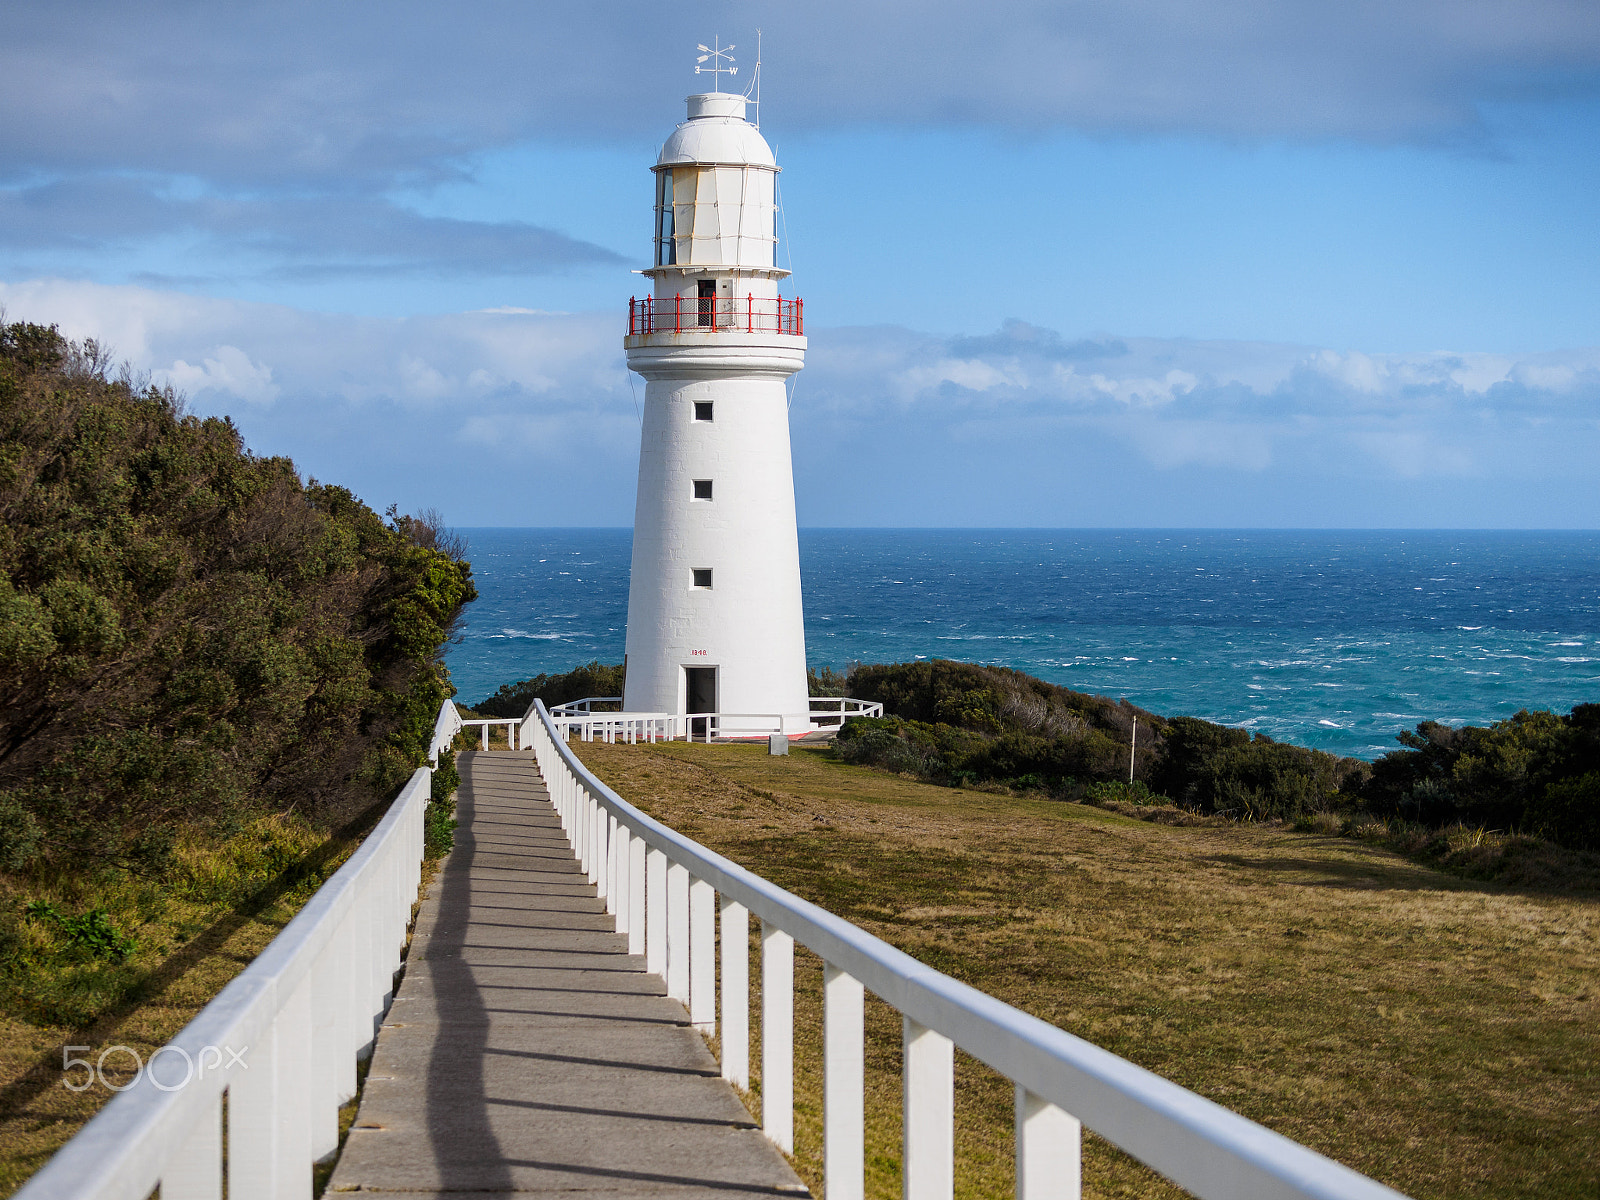 Olympus OM-D E-M1 sample photo. Cape otway lighthouse, white house founded in 1848 photography